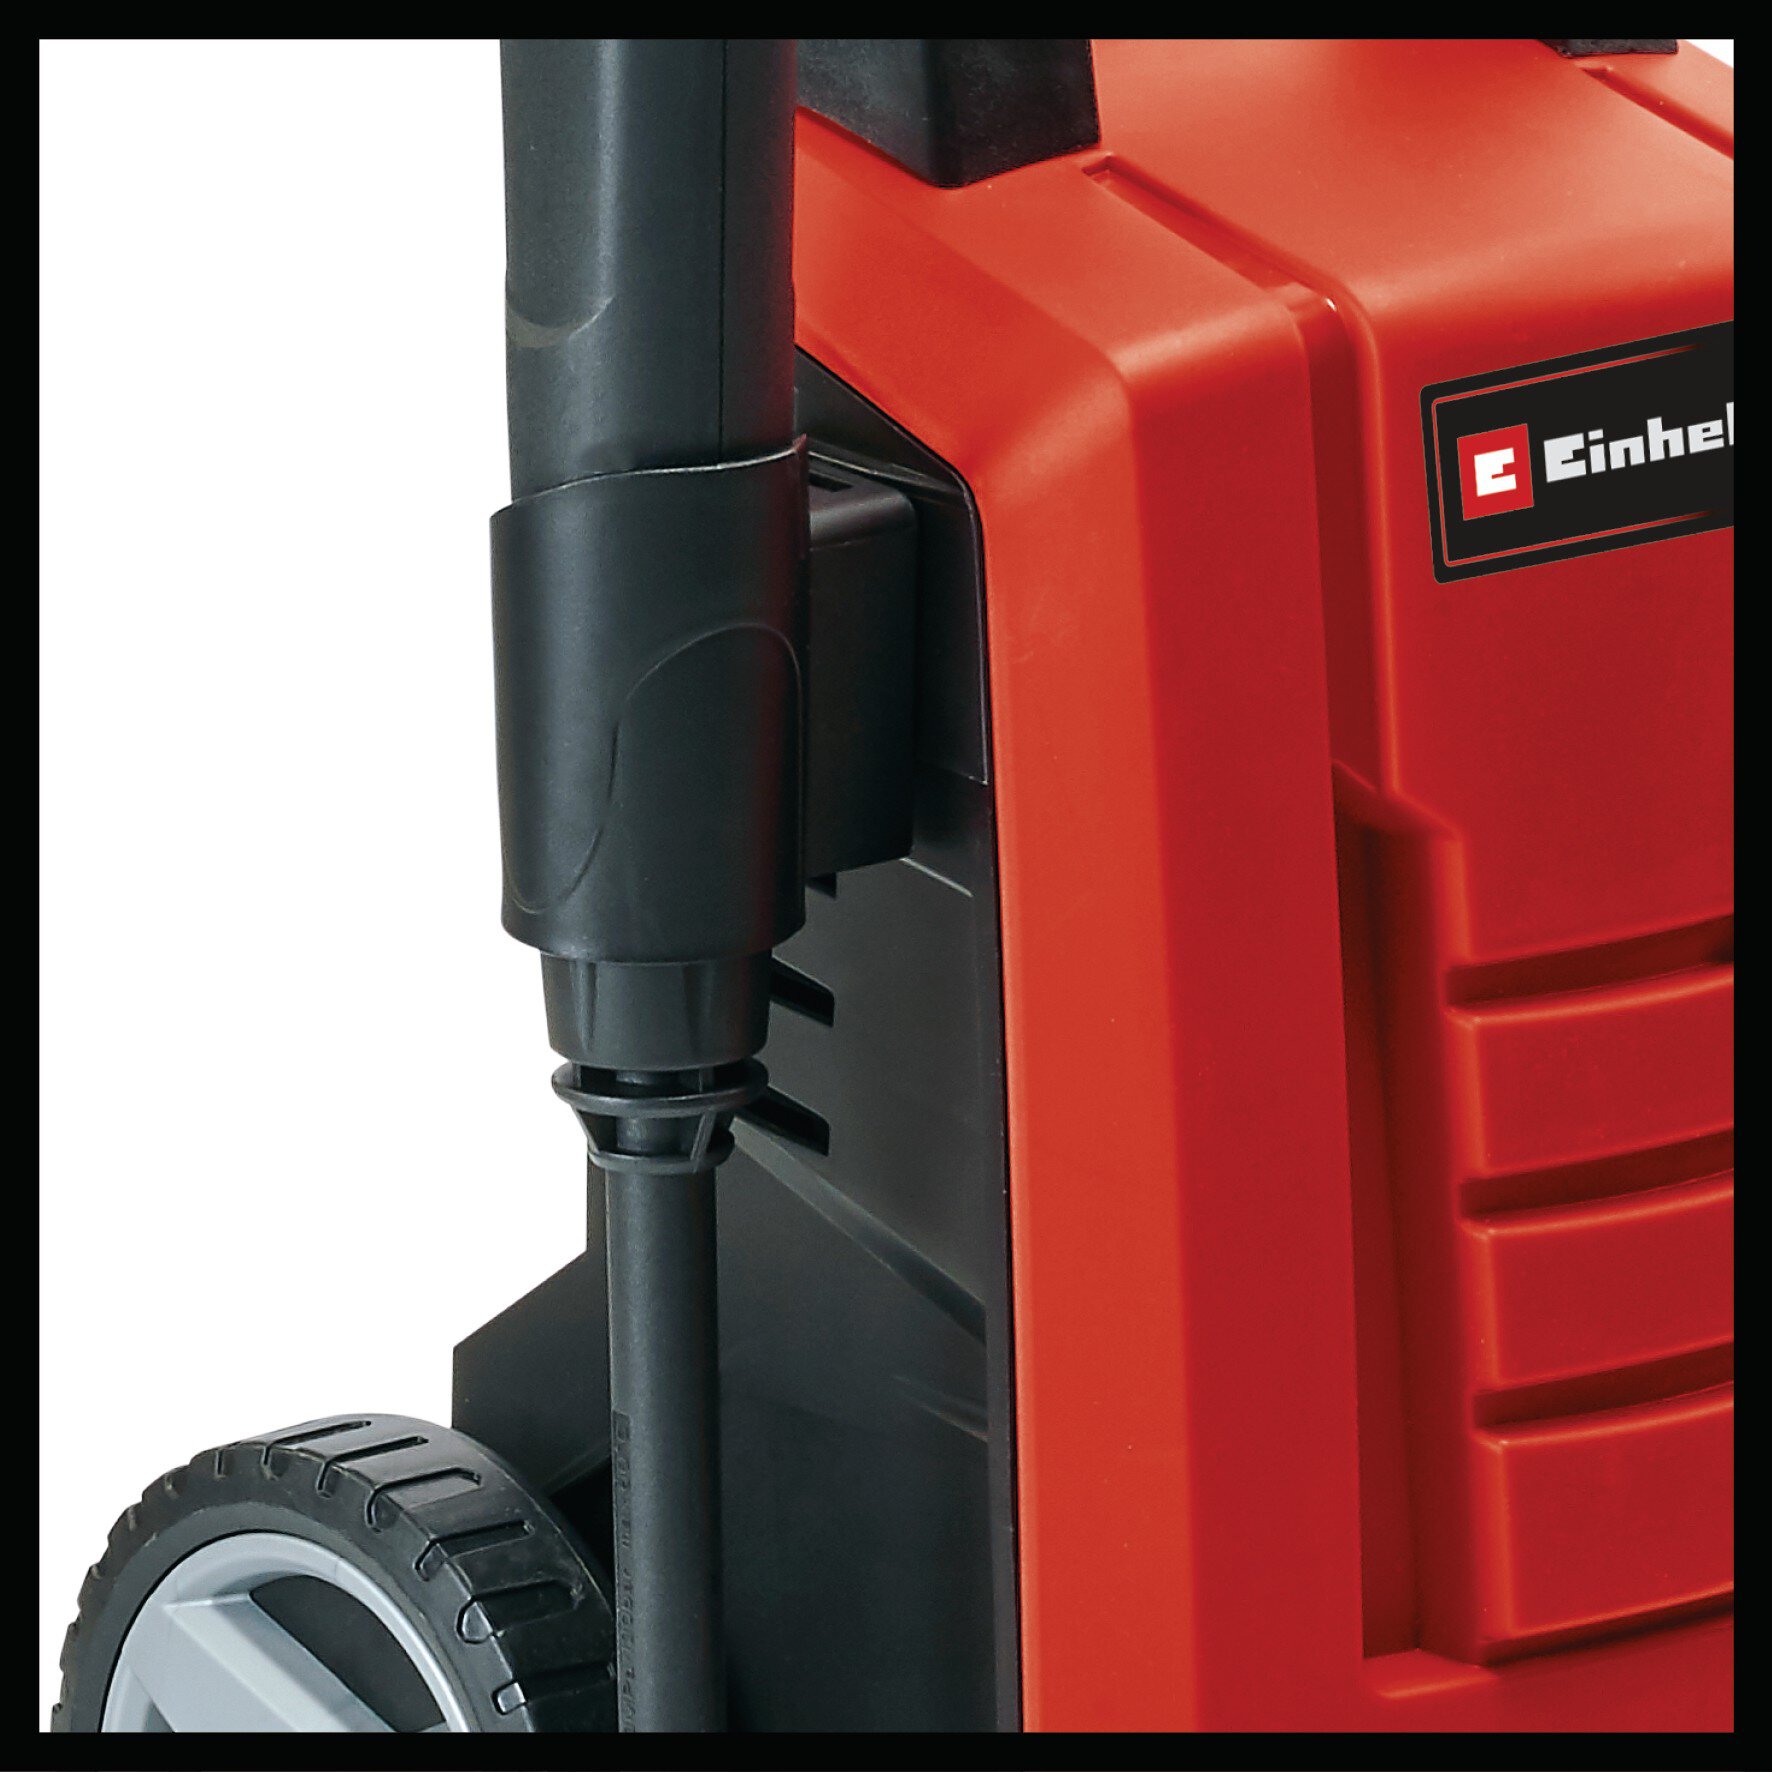 einhell-classic-high-pressure-cleaner-4140750-detail_image-003